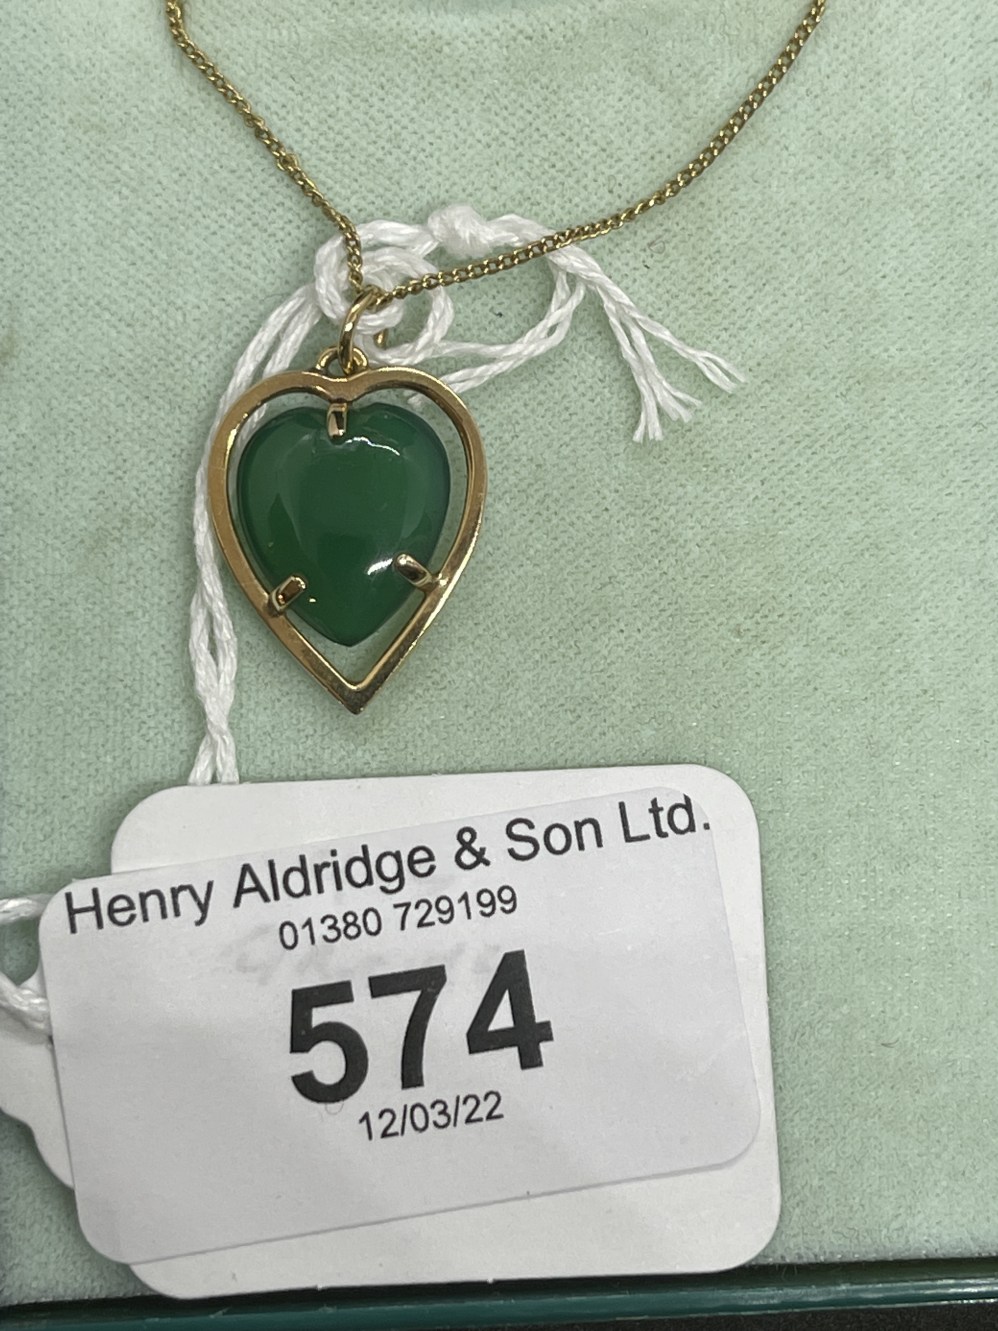 Jewellery: Yellow metal necklet with heart pendant attached set with a green agate, tests as 18ct